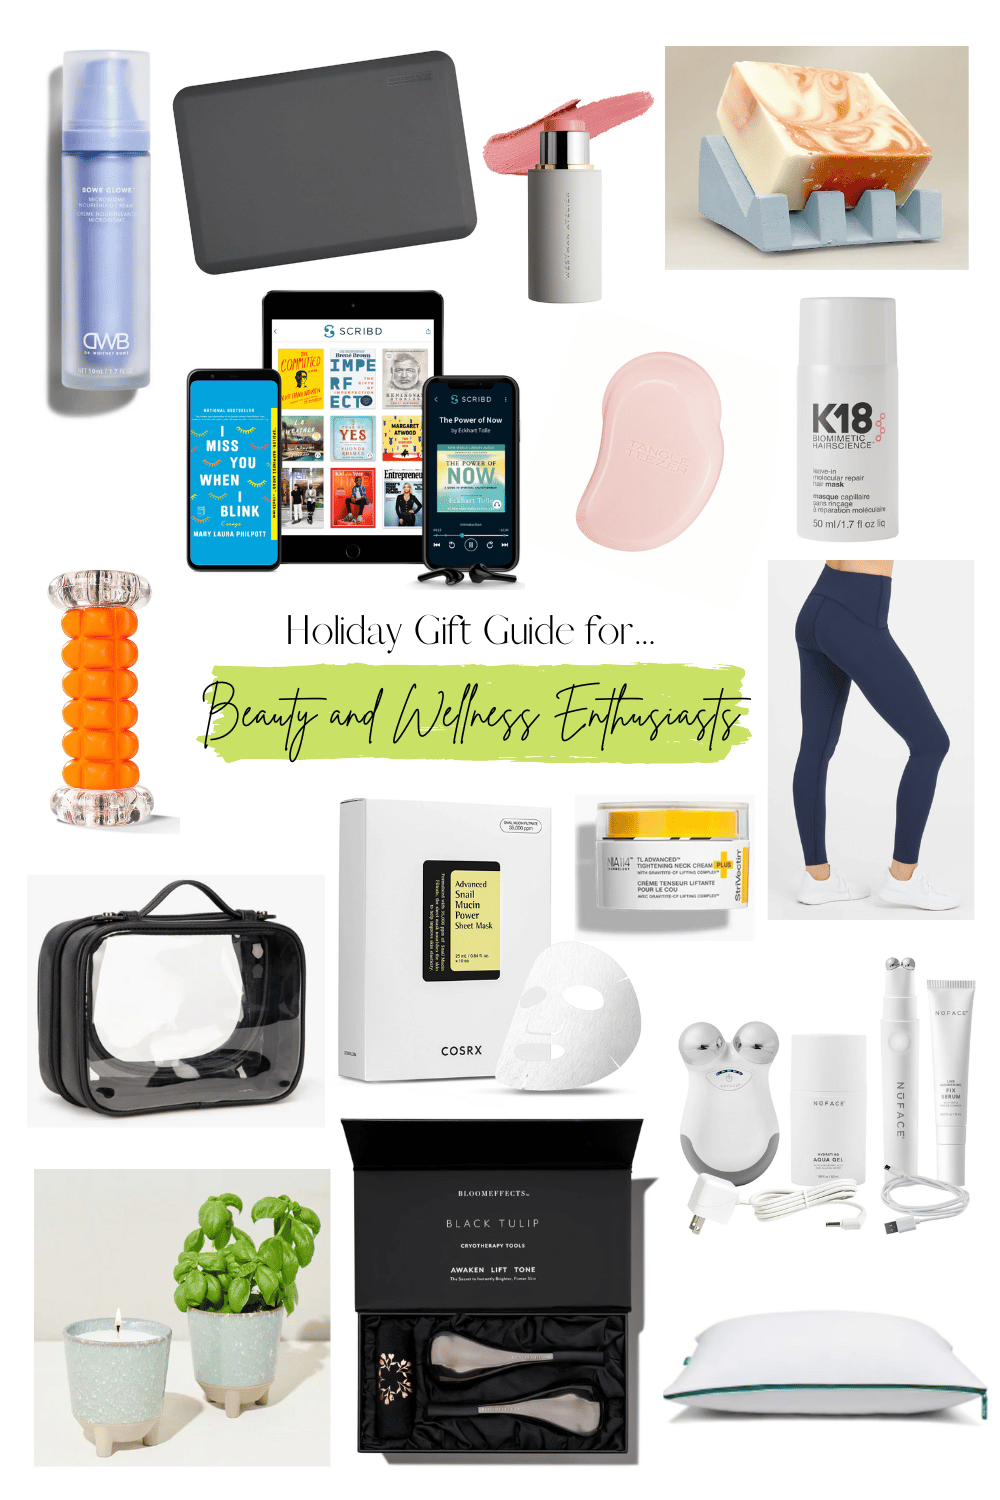 HOLIDAY GIFT GUIDE: GIFTS FOR THE WOMEN IN YOUR LIFE, CHIC TALK